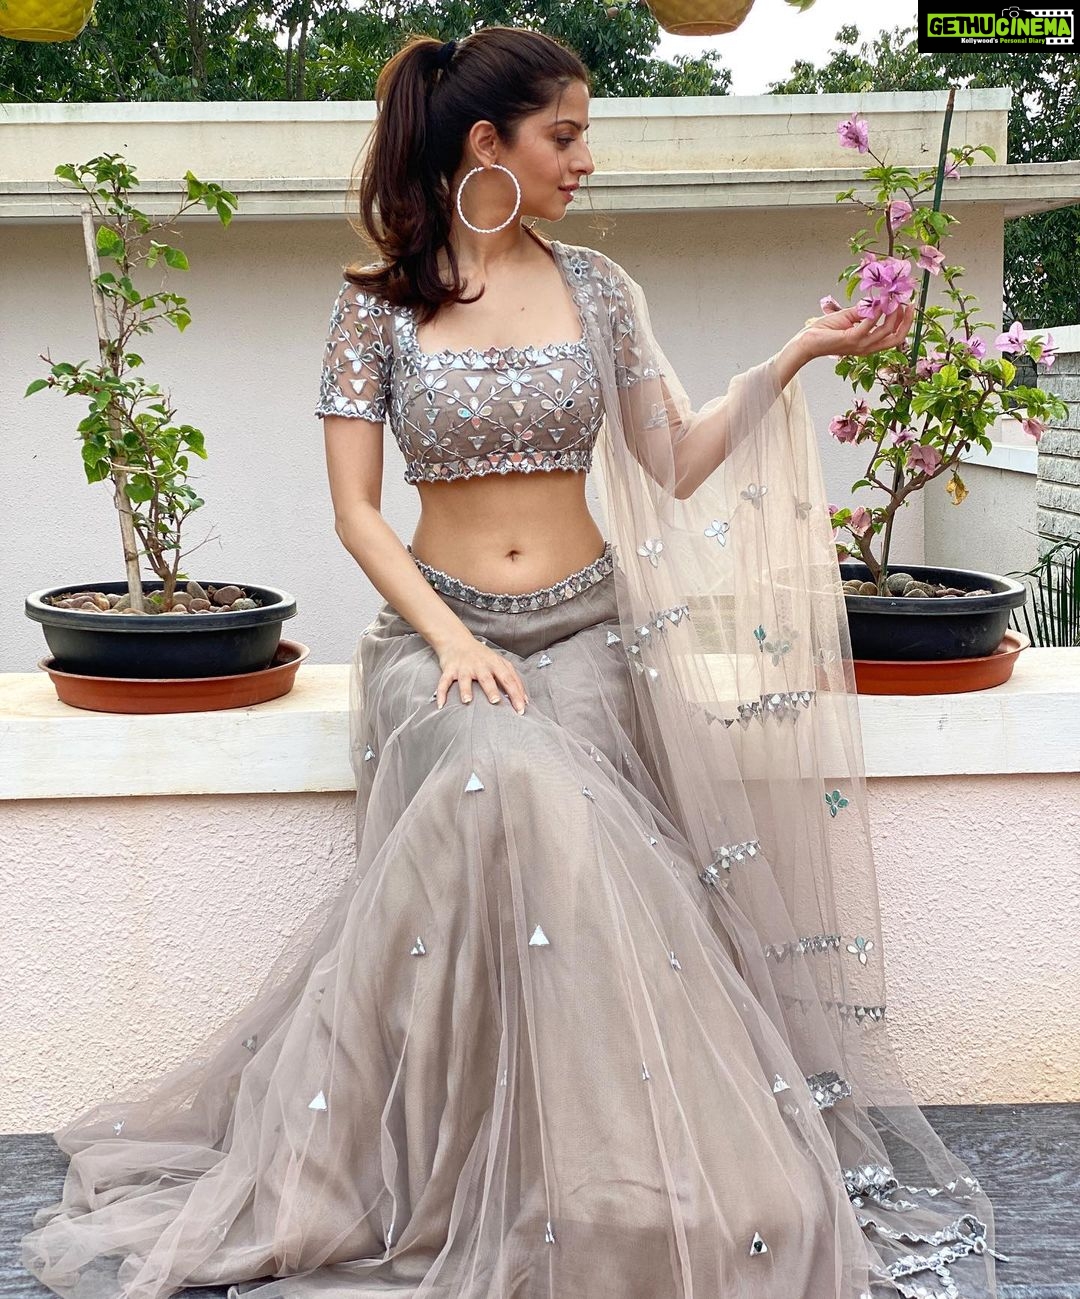 Vedhika - 182K Likes - Most Liked Instagram Photos